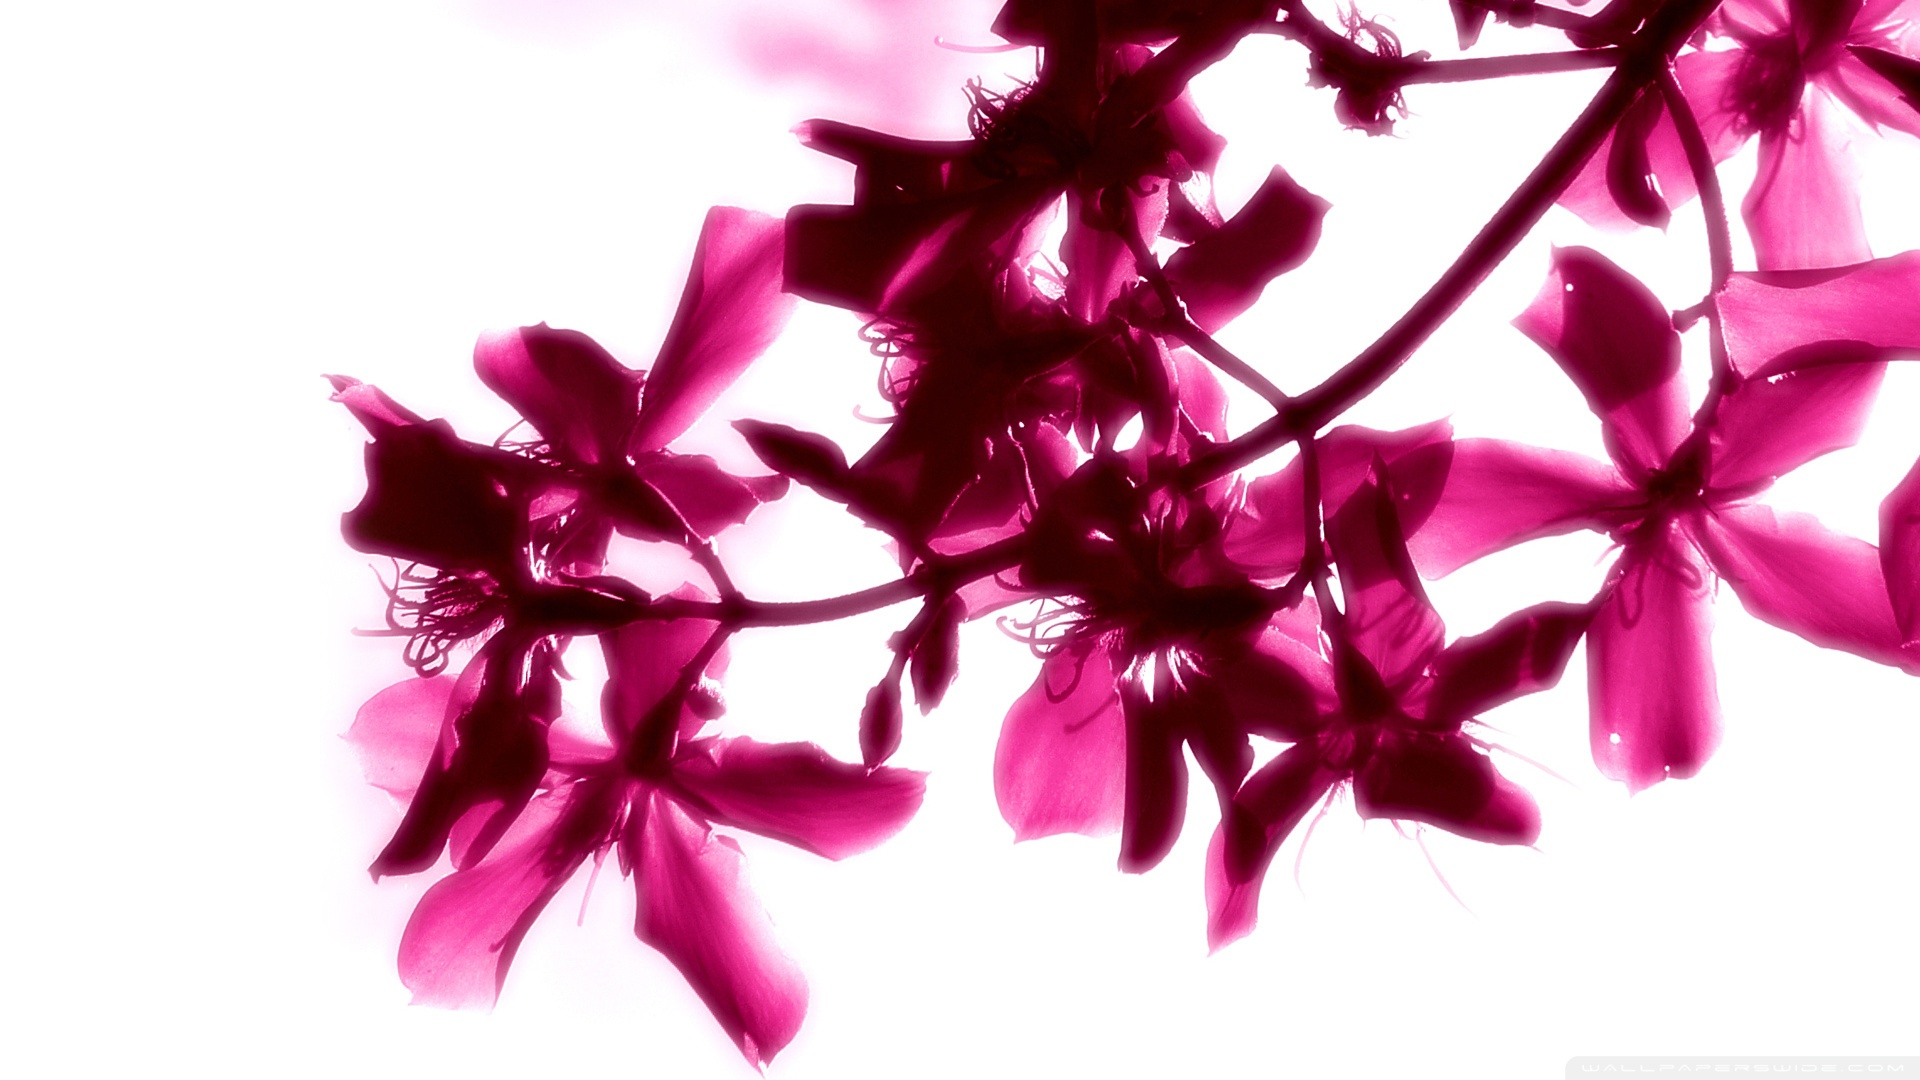 Pink Flowers On White Background Wallpaper 1920x1080 Pink Flowers On